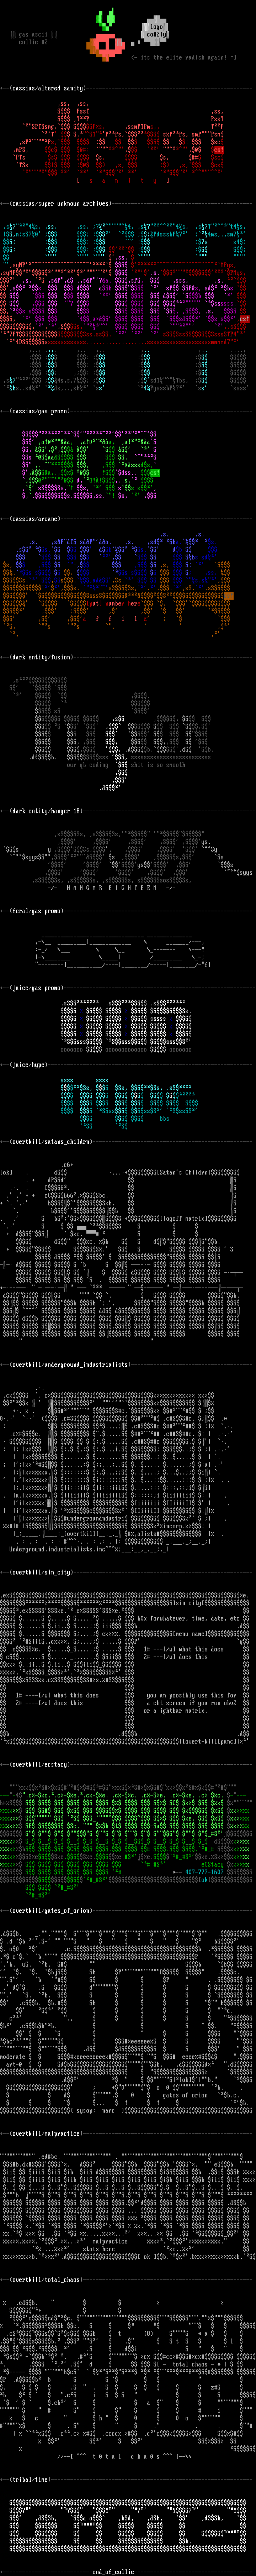 gas ascii collection #2 by gas members